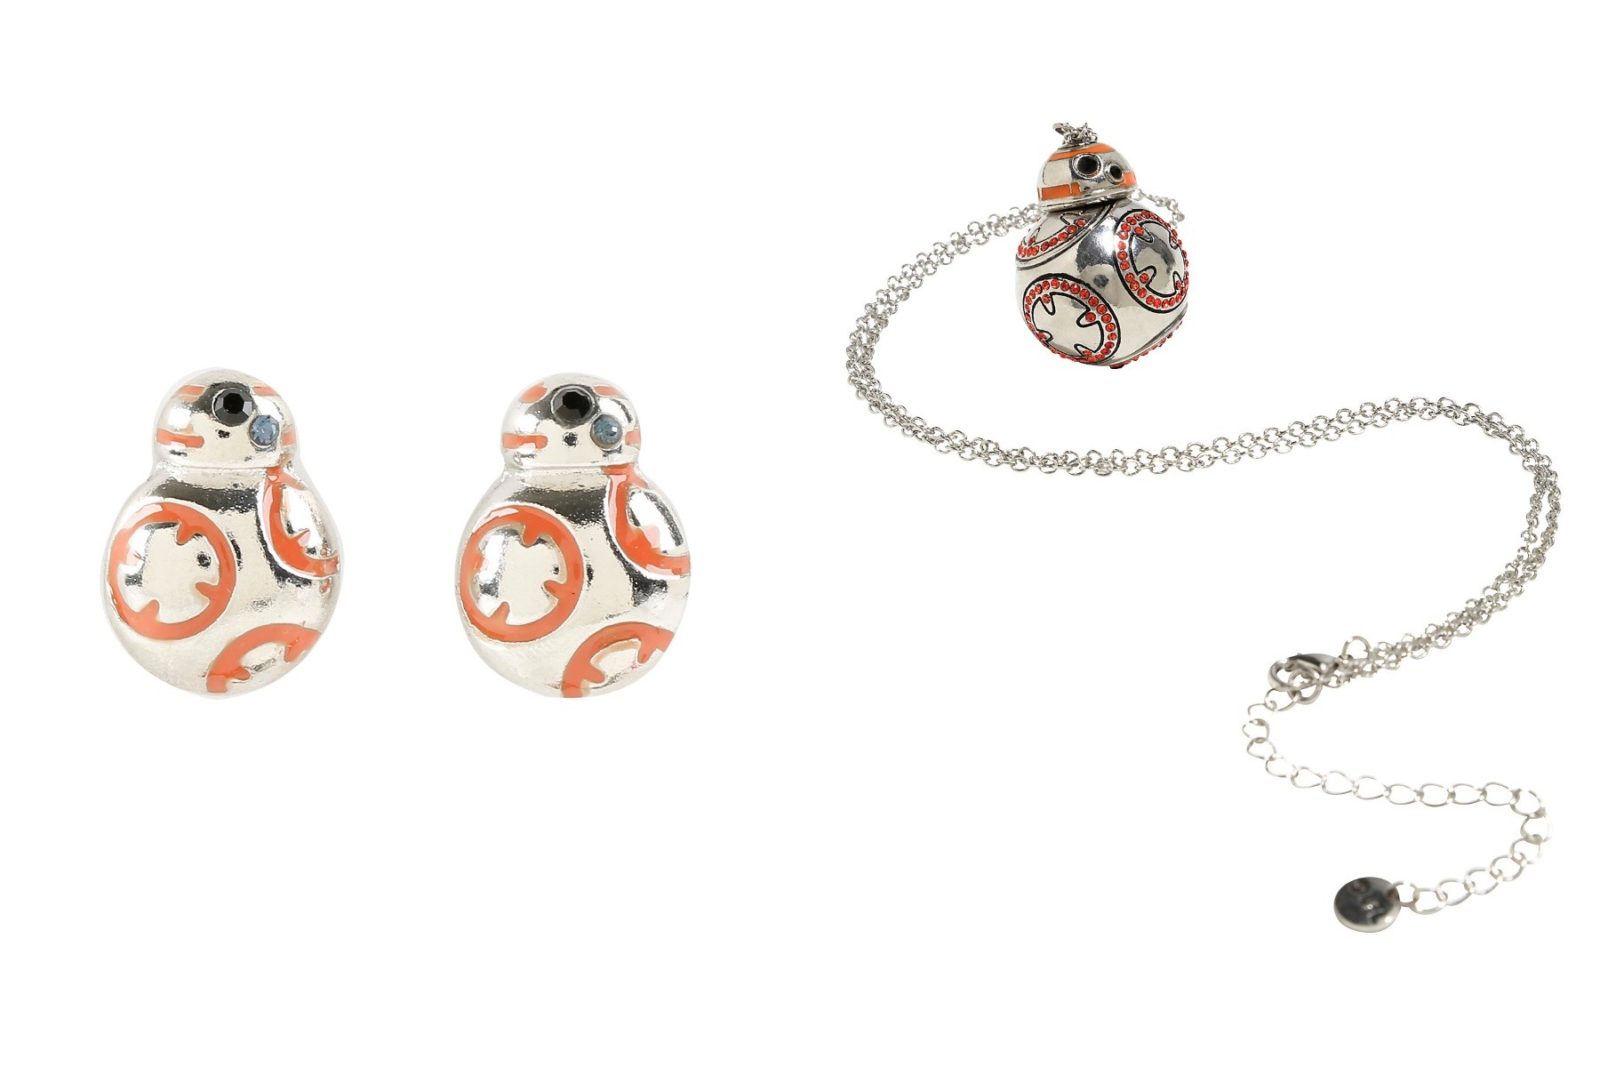 Hot Topic - BB-8 stud earrings and necklace